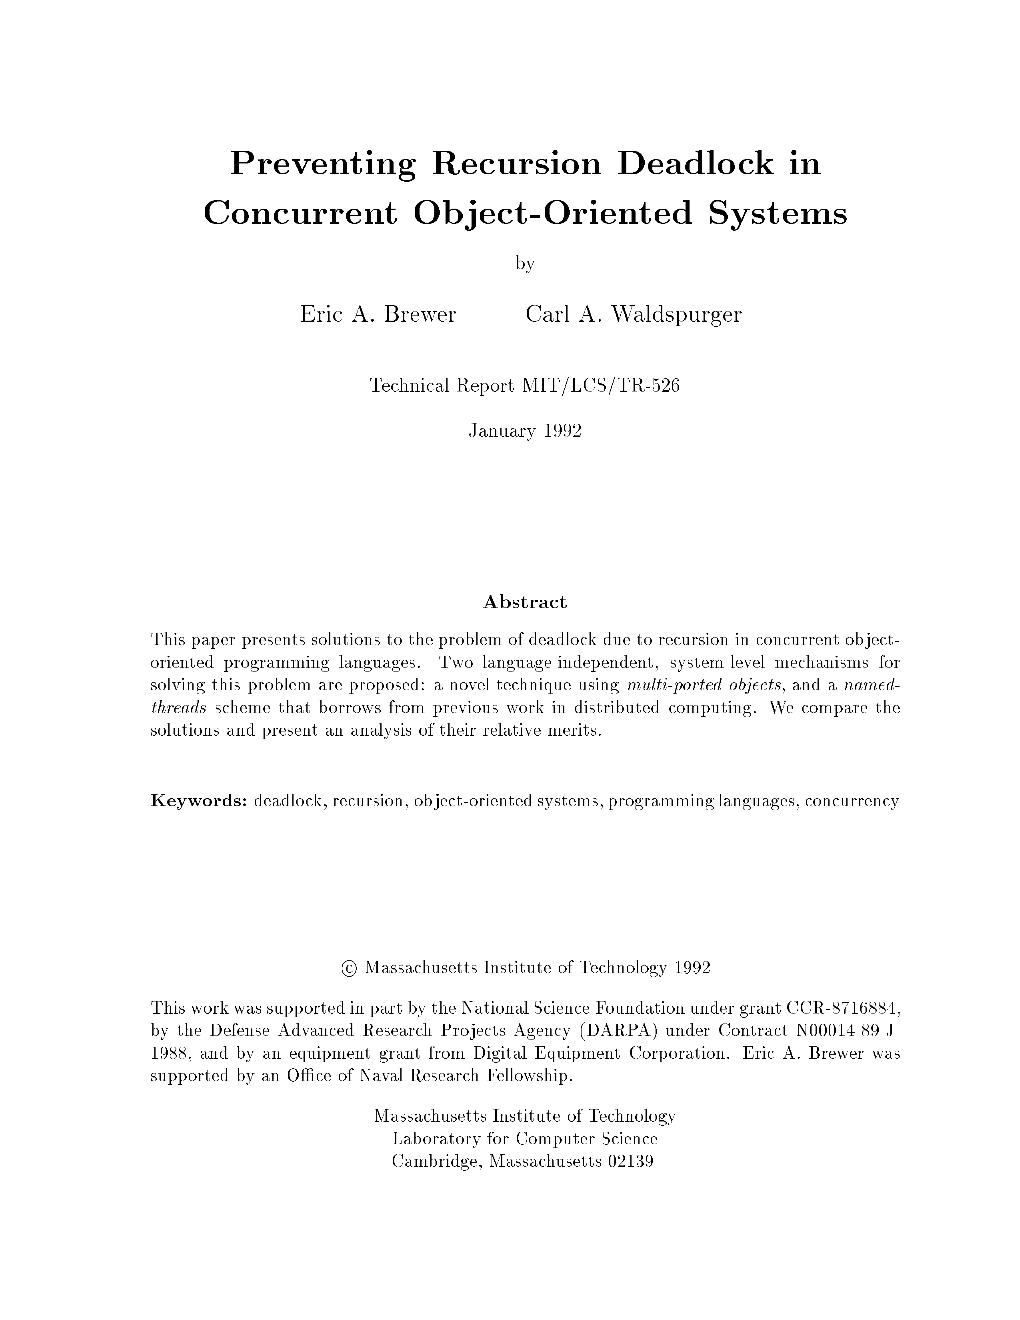 Preventing Recursion Deadlock in Concurrent Object-Oriented Systems